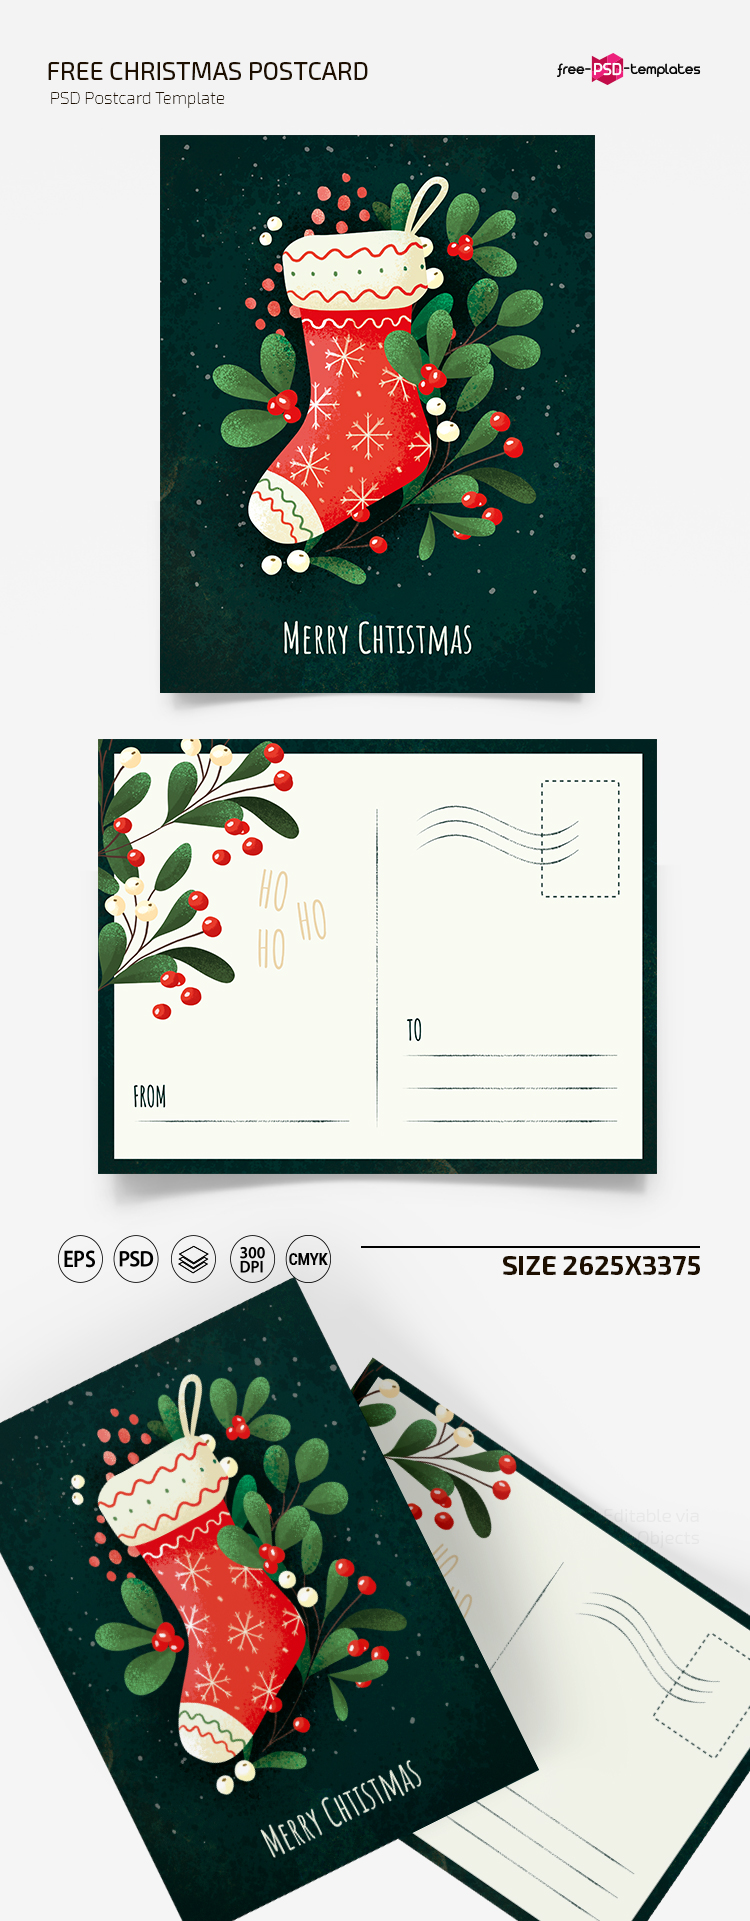 Free Christmas Postcard Templates In PSD EPS Free PSD Templates